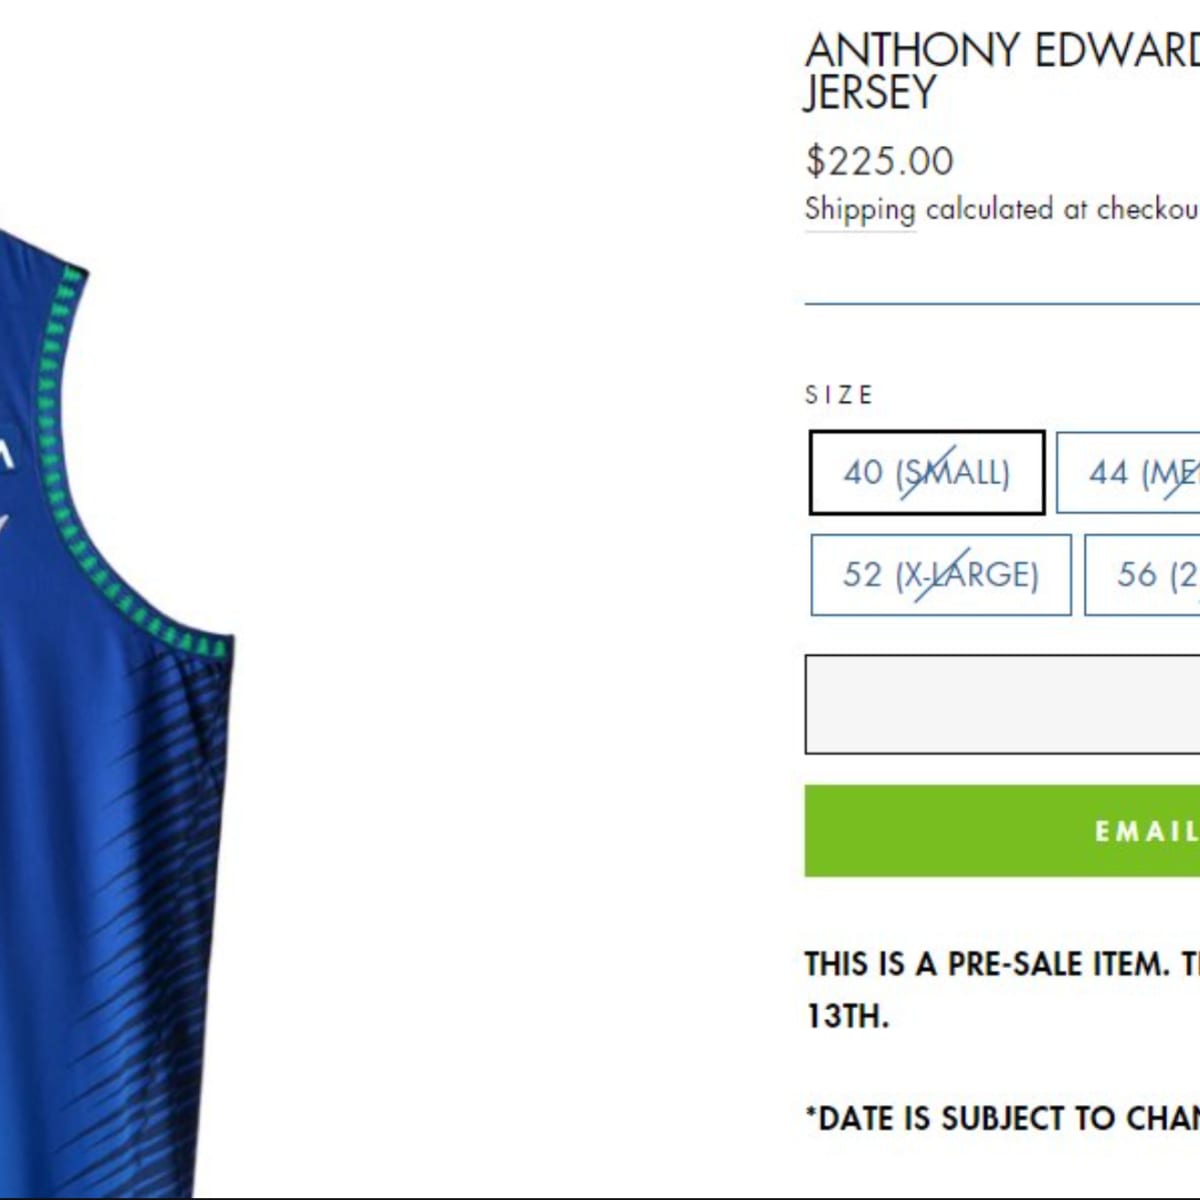 Anthony Edwards City Edition Timberwolves jerseys sell out